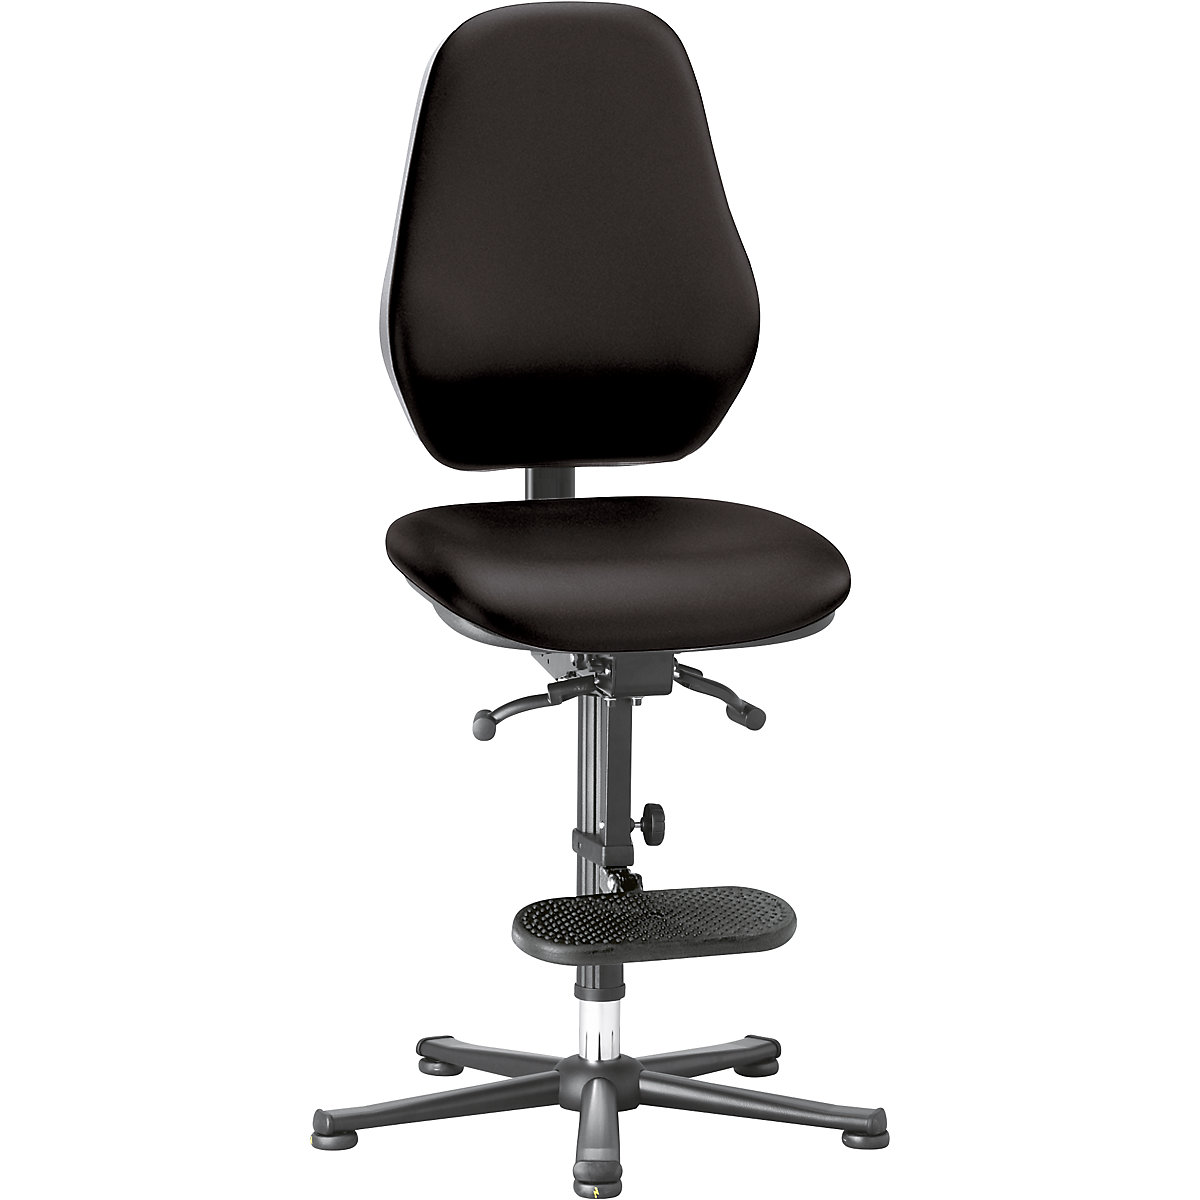 Industrial swivel chair – bimos, with ESD protection, gas spring, floor glides, step-up, black vinyl covering-5